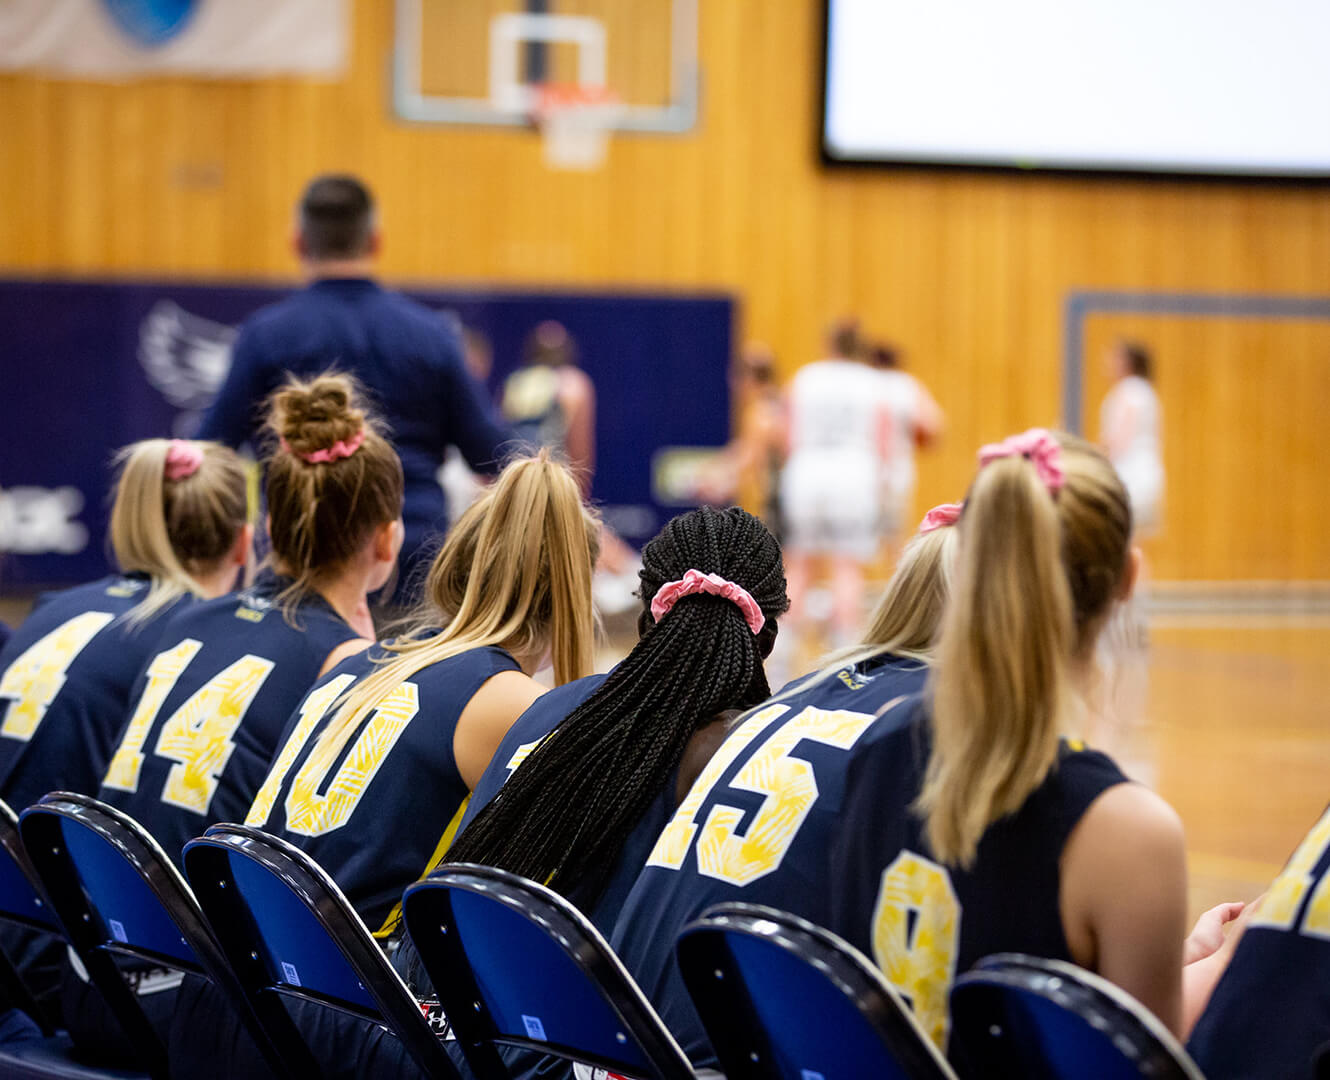 NAIT women's basketball team sits with their backs to the camera in the court watching the play